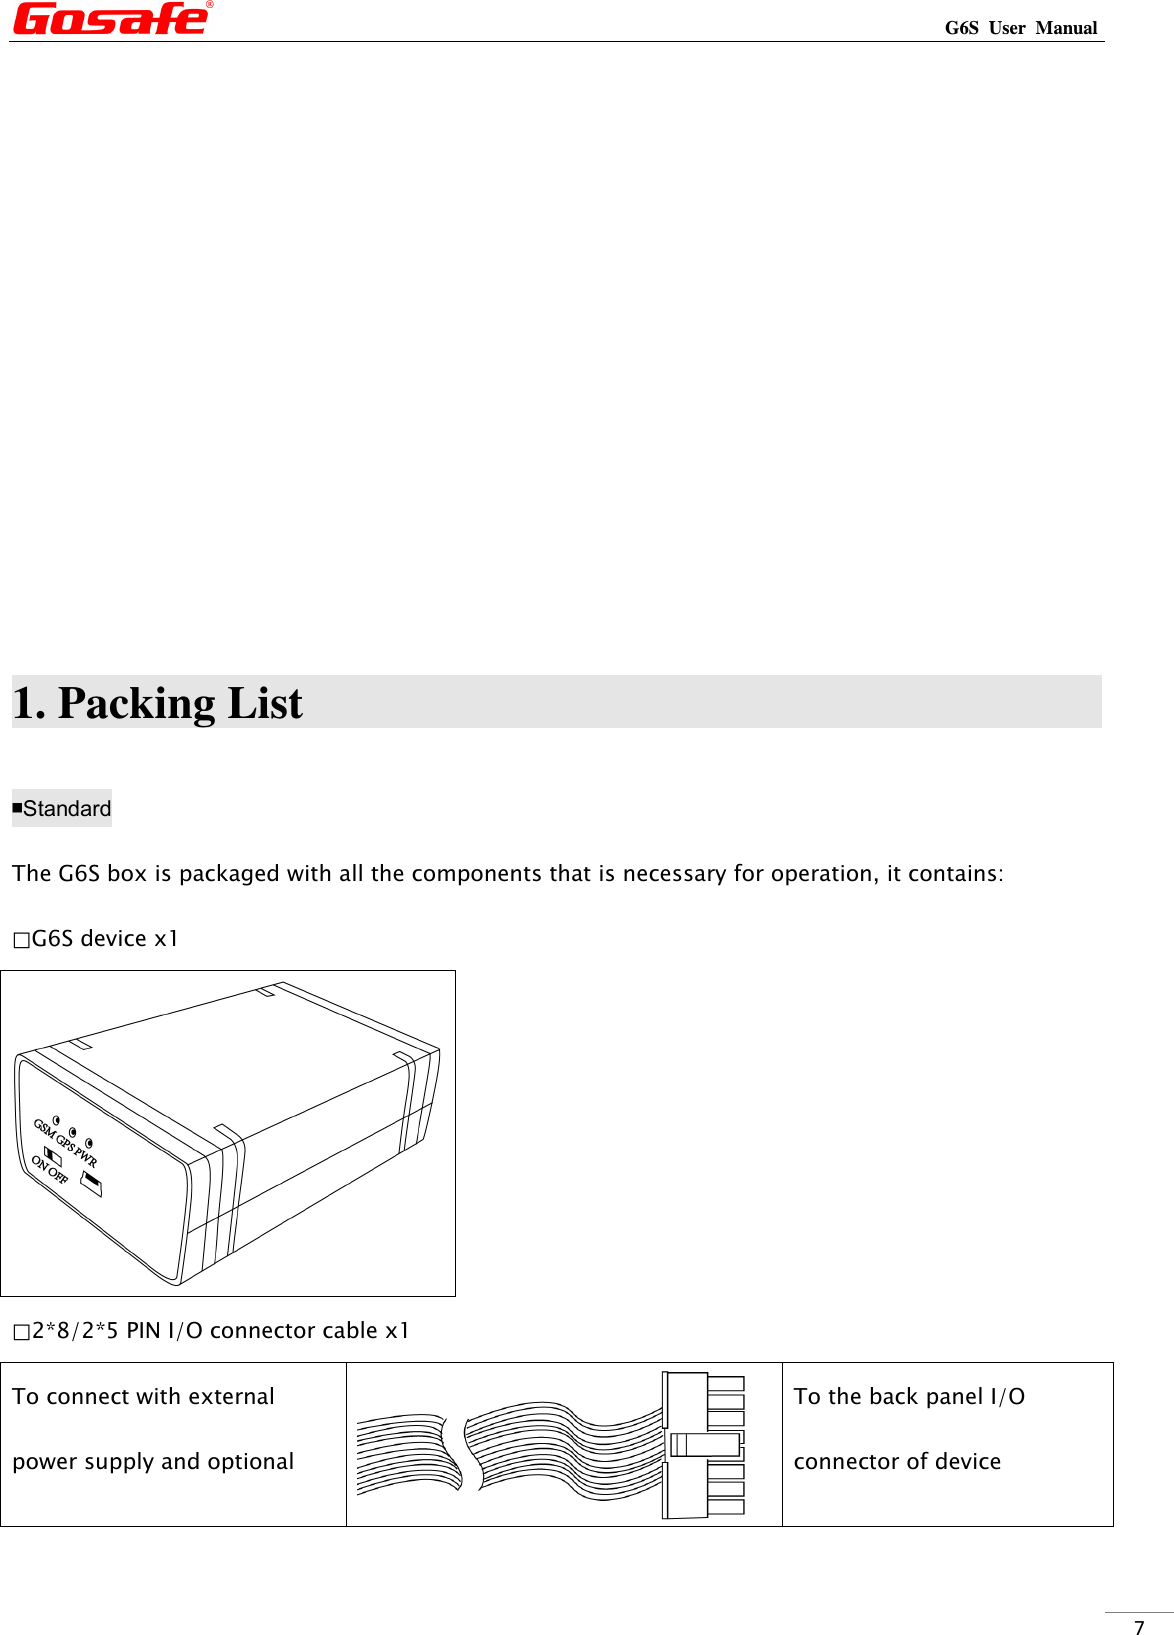                                                                                                                                                             G6S  User  Manual  7          1. Packing List                                                                                ￭Standard The G6S box is packaged with all the components that is necessary for operation, it contains: ⃞G6S device x1  ⃞2*8/2*5 PIN I/O connector cable x1 To connect with external power supply and optional  To the back panel I/O connector of device 